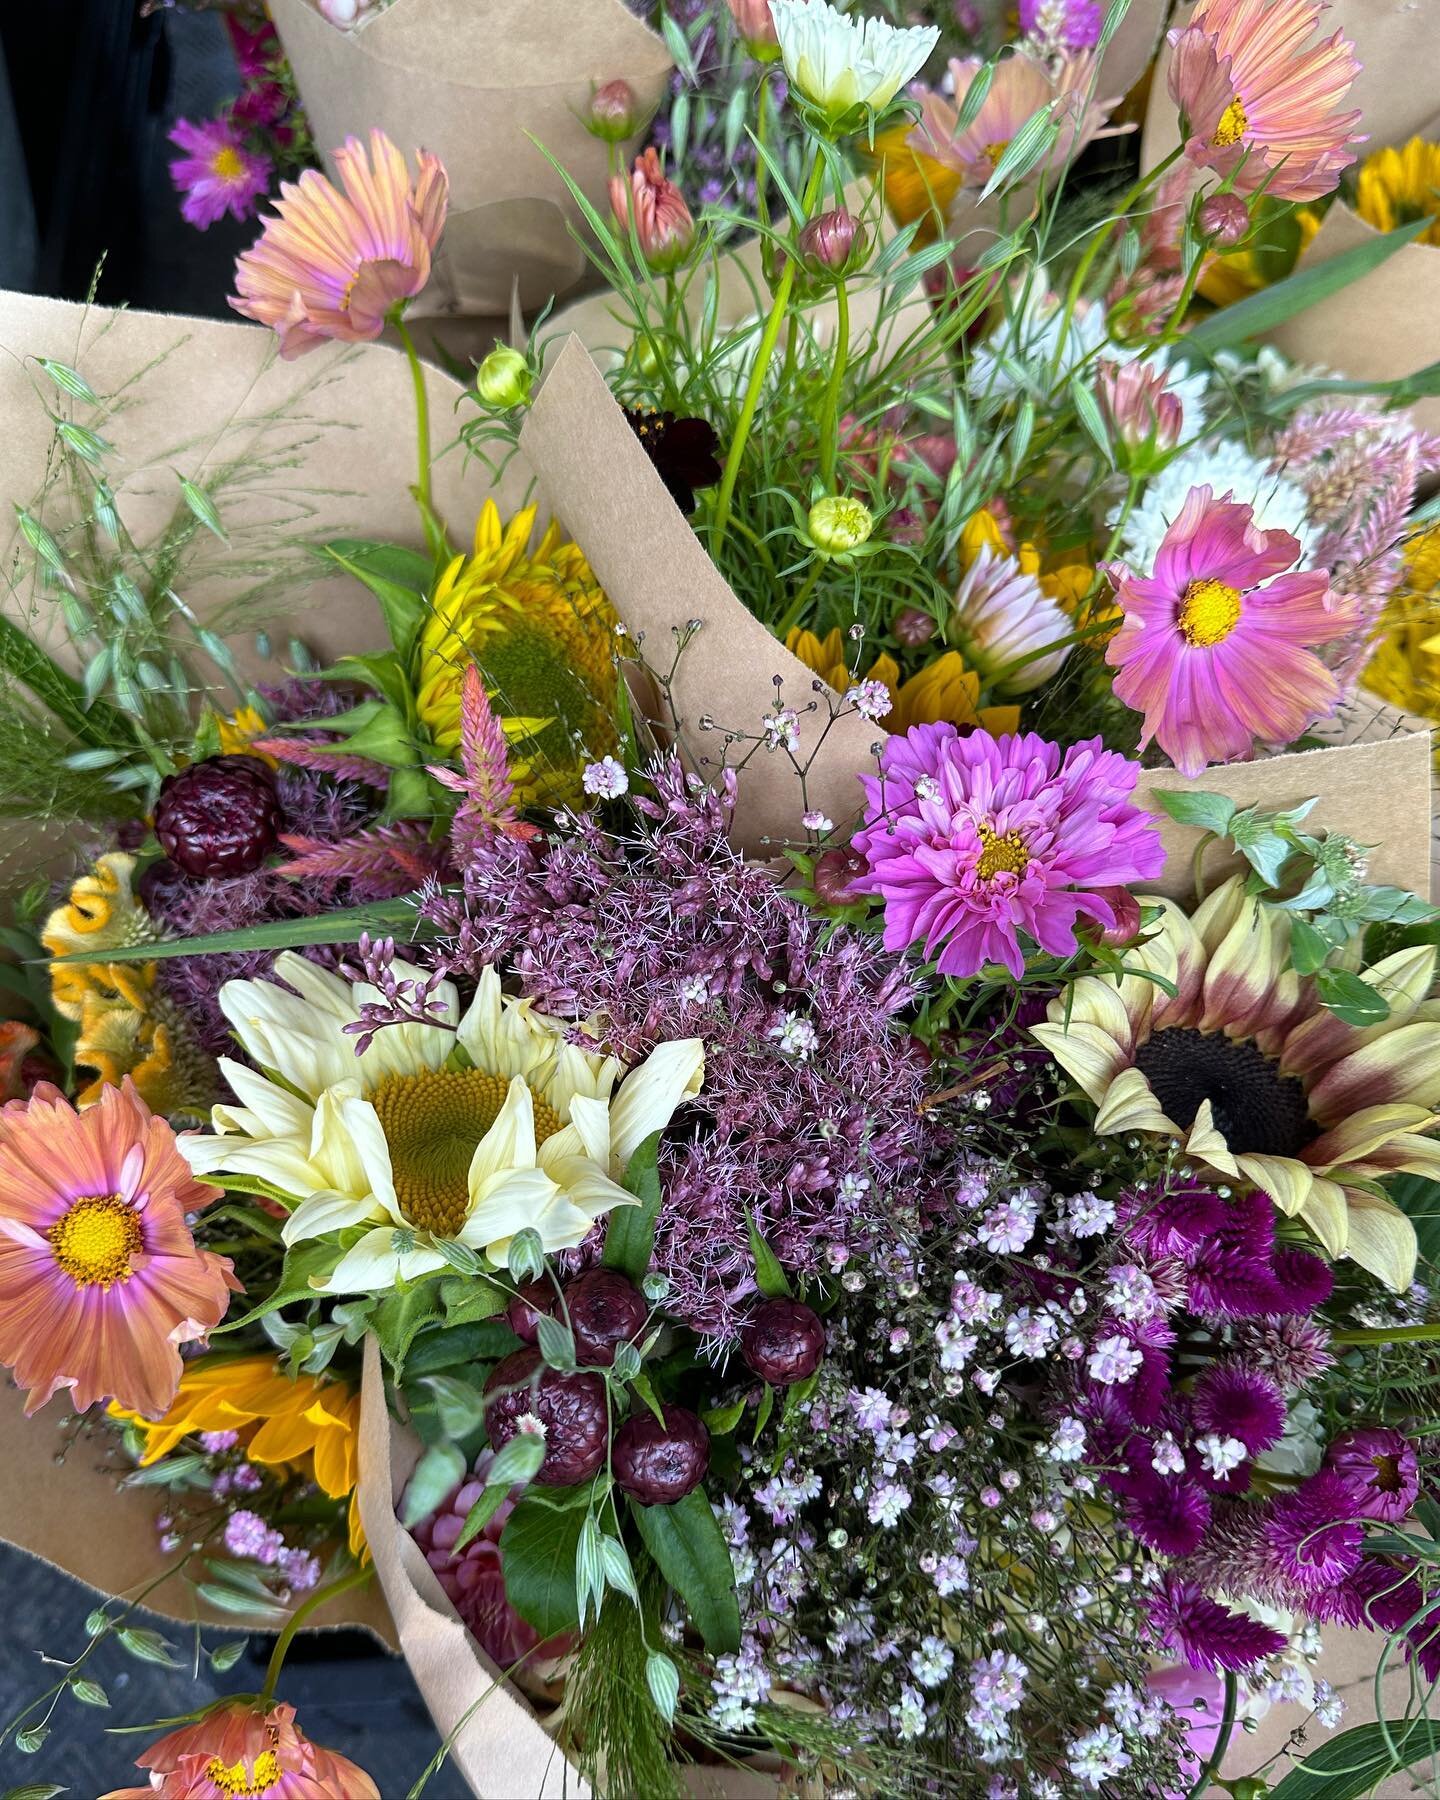 A big thank you to everyone who shopped with us yesterday @washingtonctfarmersmarket ! It was a fantastic market filled with flower options. 
For future flower inquiries or to host a flower pick up use the contact form on our website or email rachel@